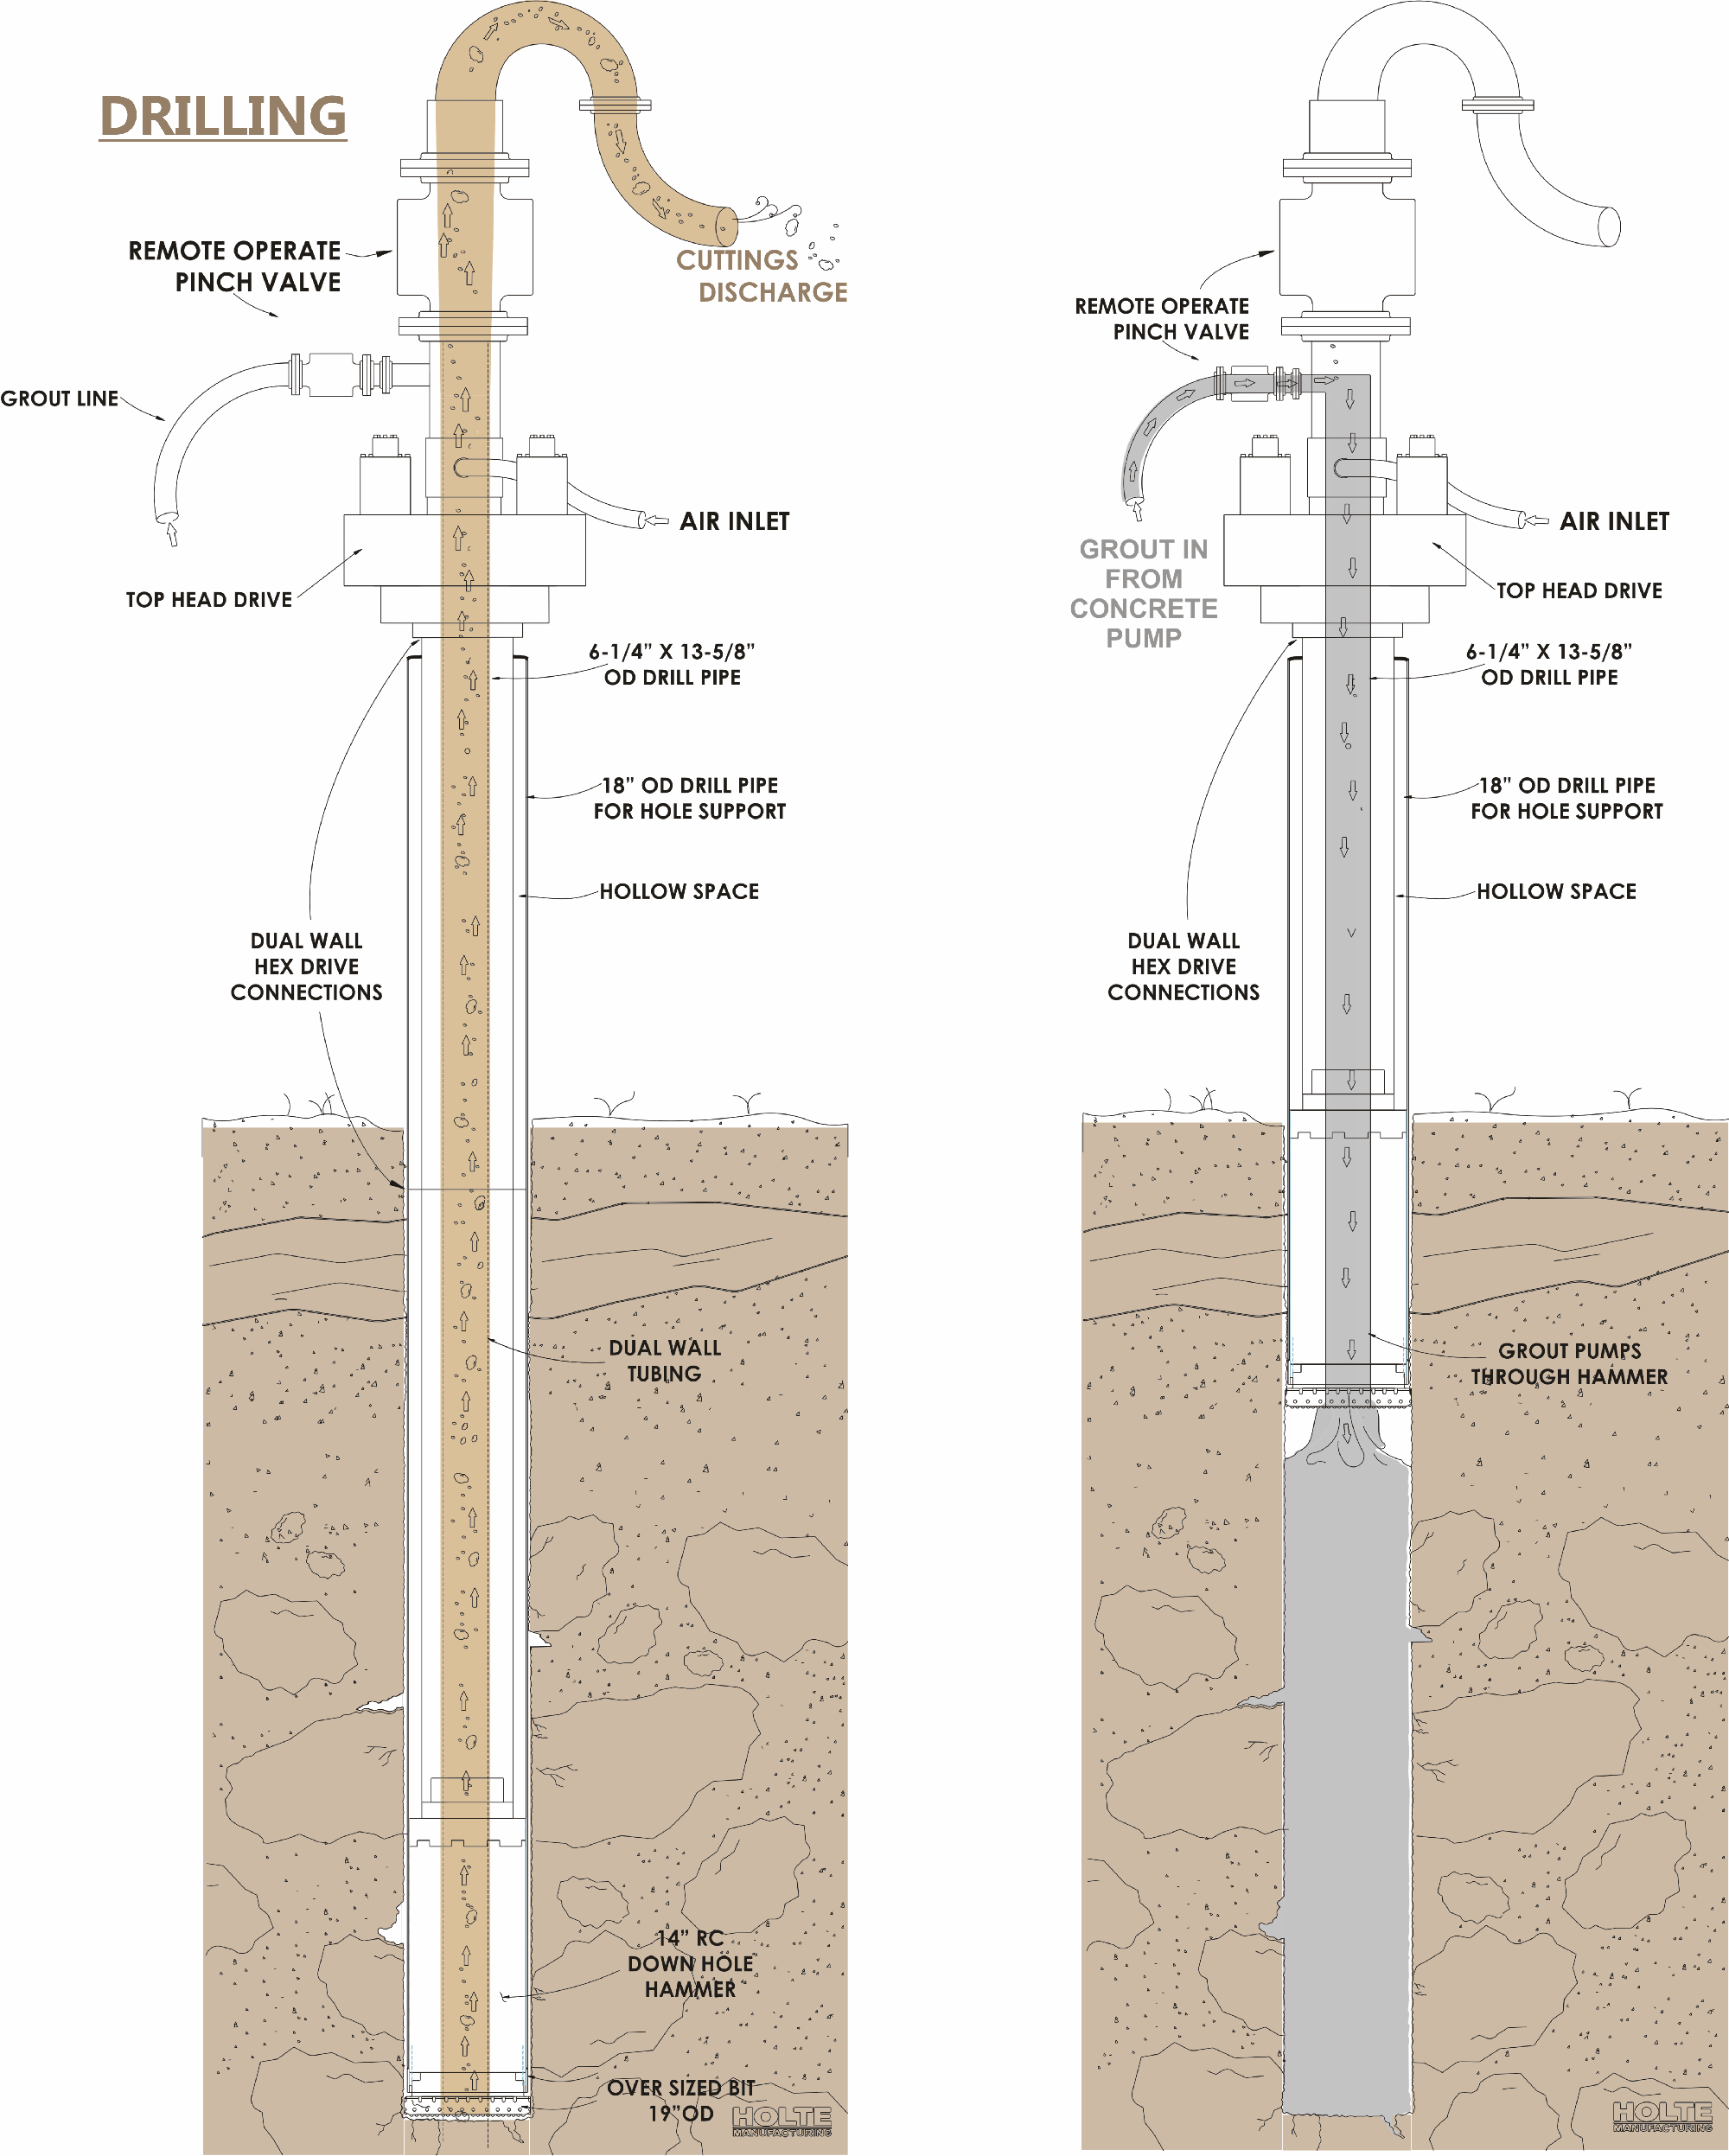 Grout Through Technology Secant walls, pilings, pilons, micropiles, and foundation with Reverse Circulation